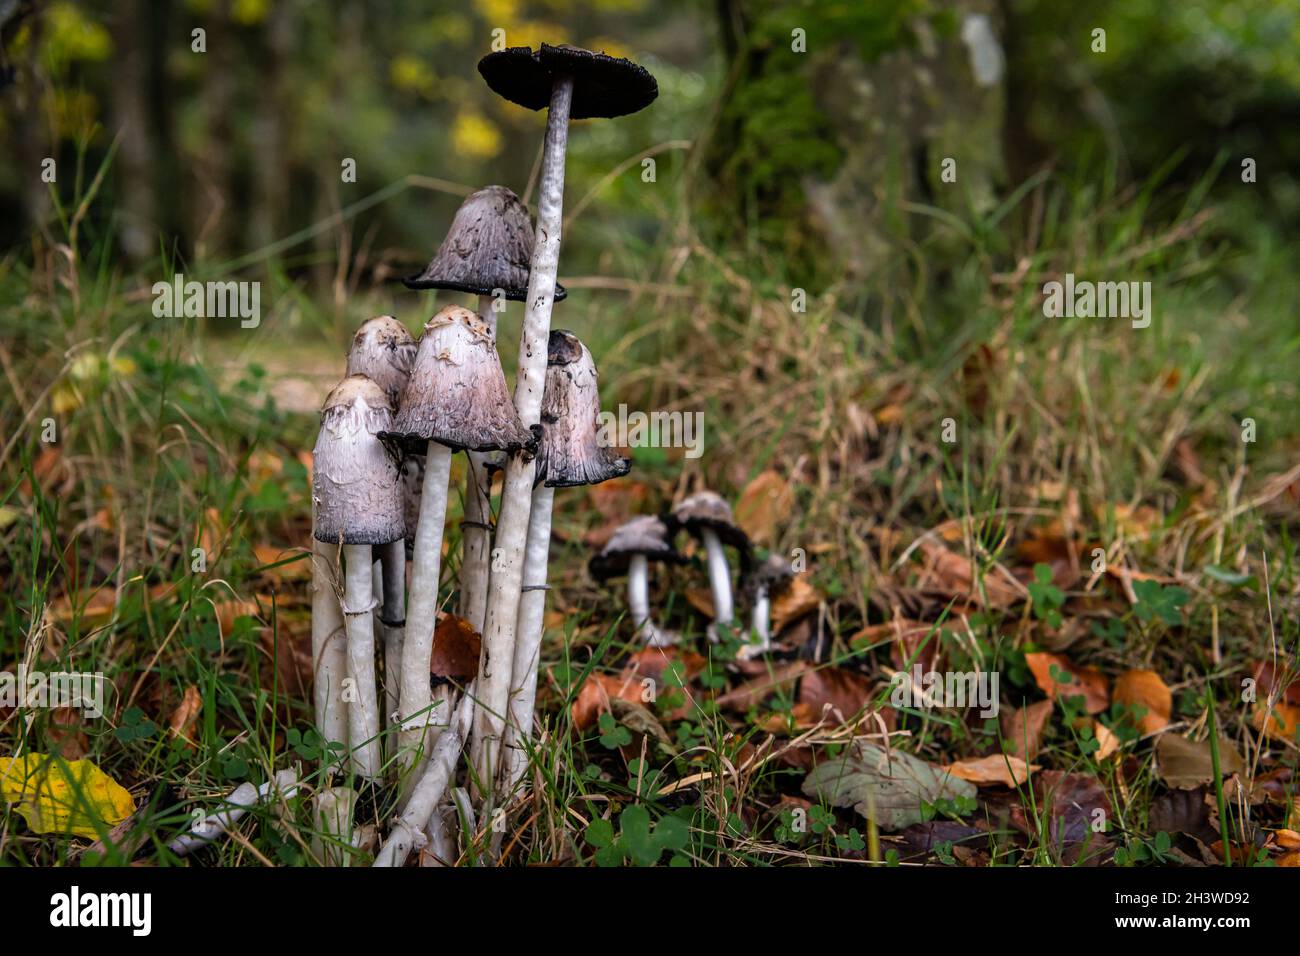 An autumnal 3 shot HDR image of the Shaggy Ink Cap, Coprinus comatus, aka Lawyers wig and Shaggy Mane, in Moidart, Scotland. 15 October 2021 Stock Photo